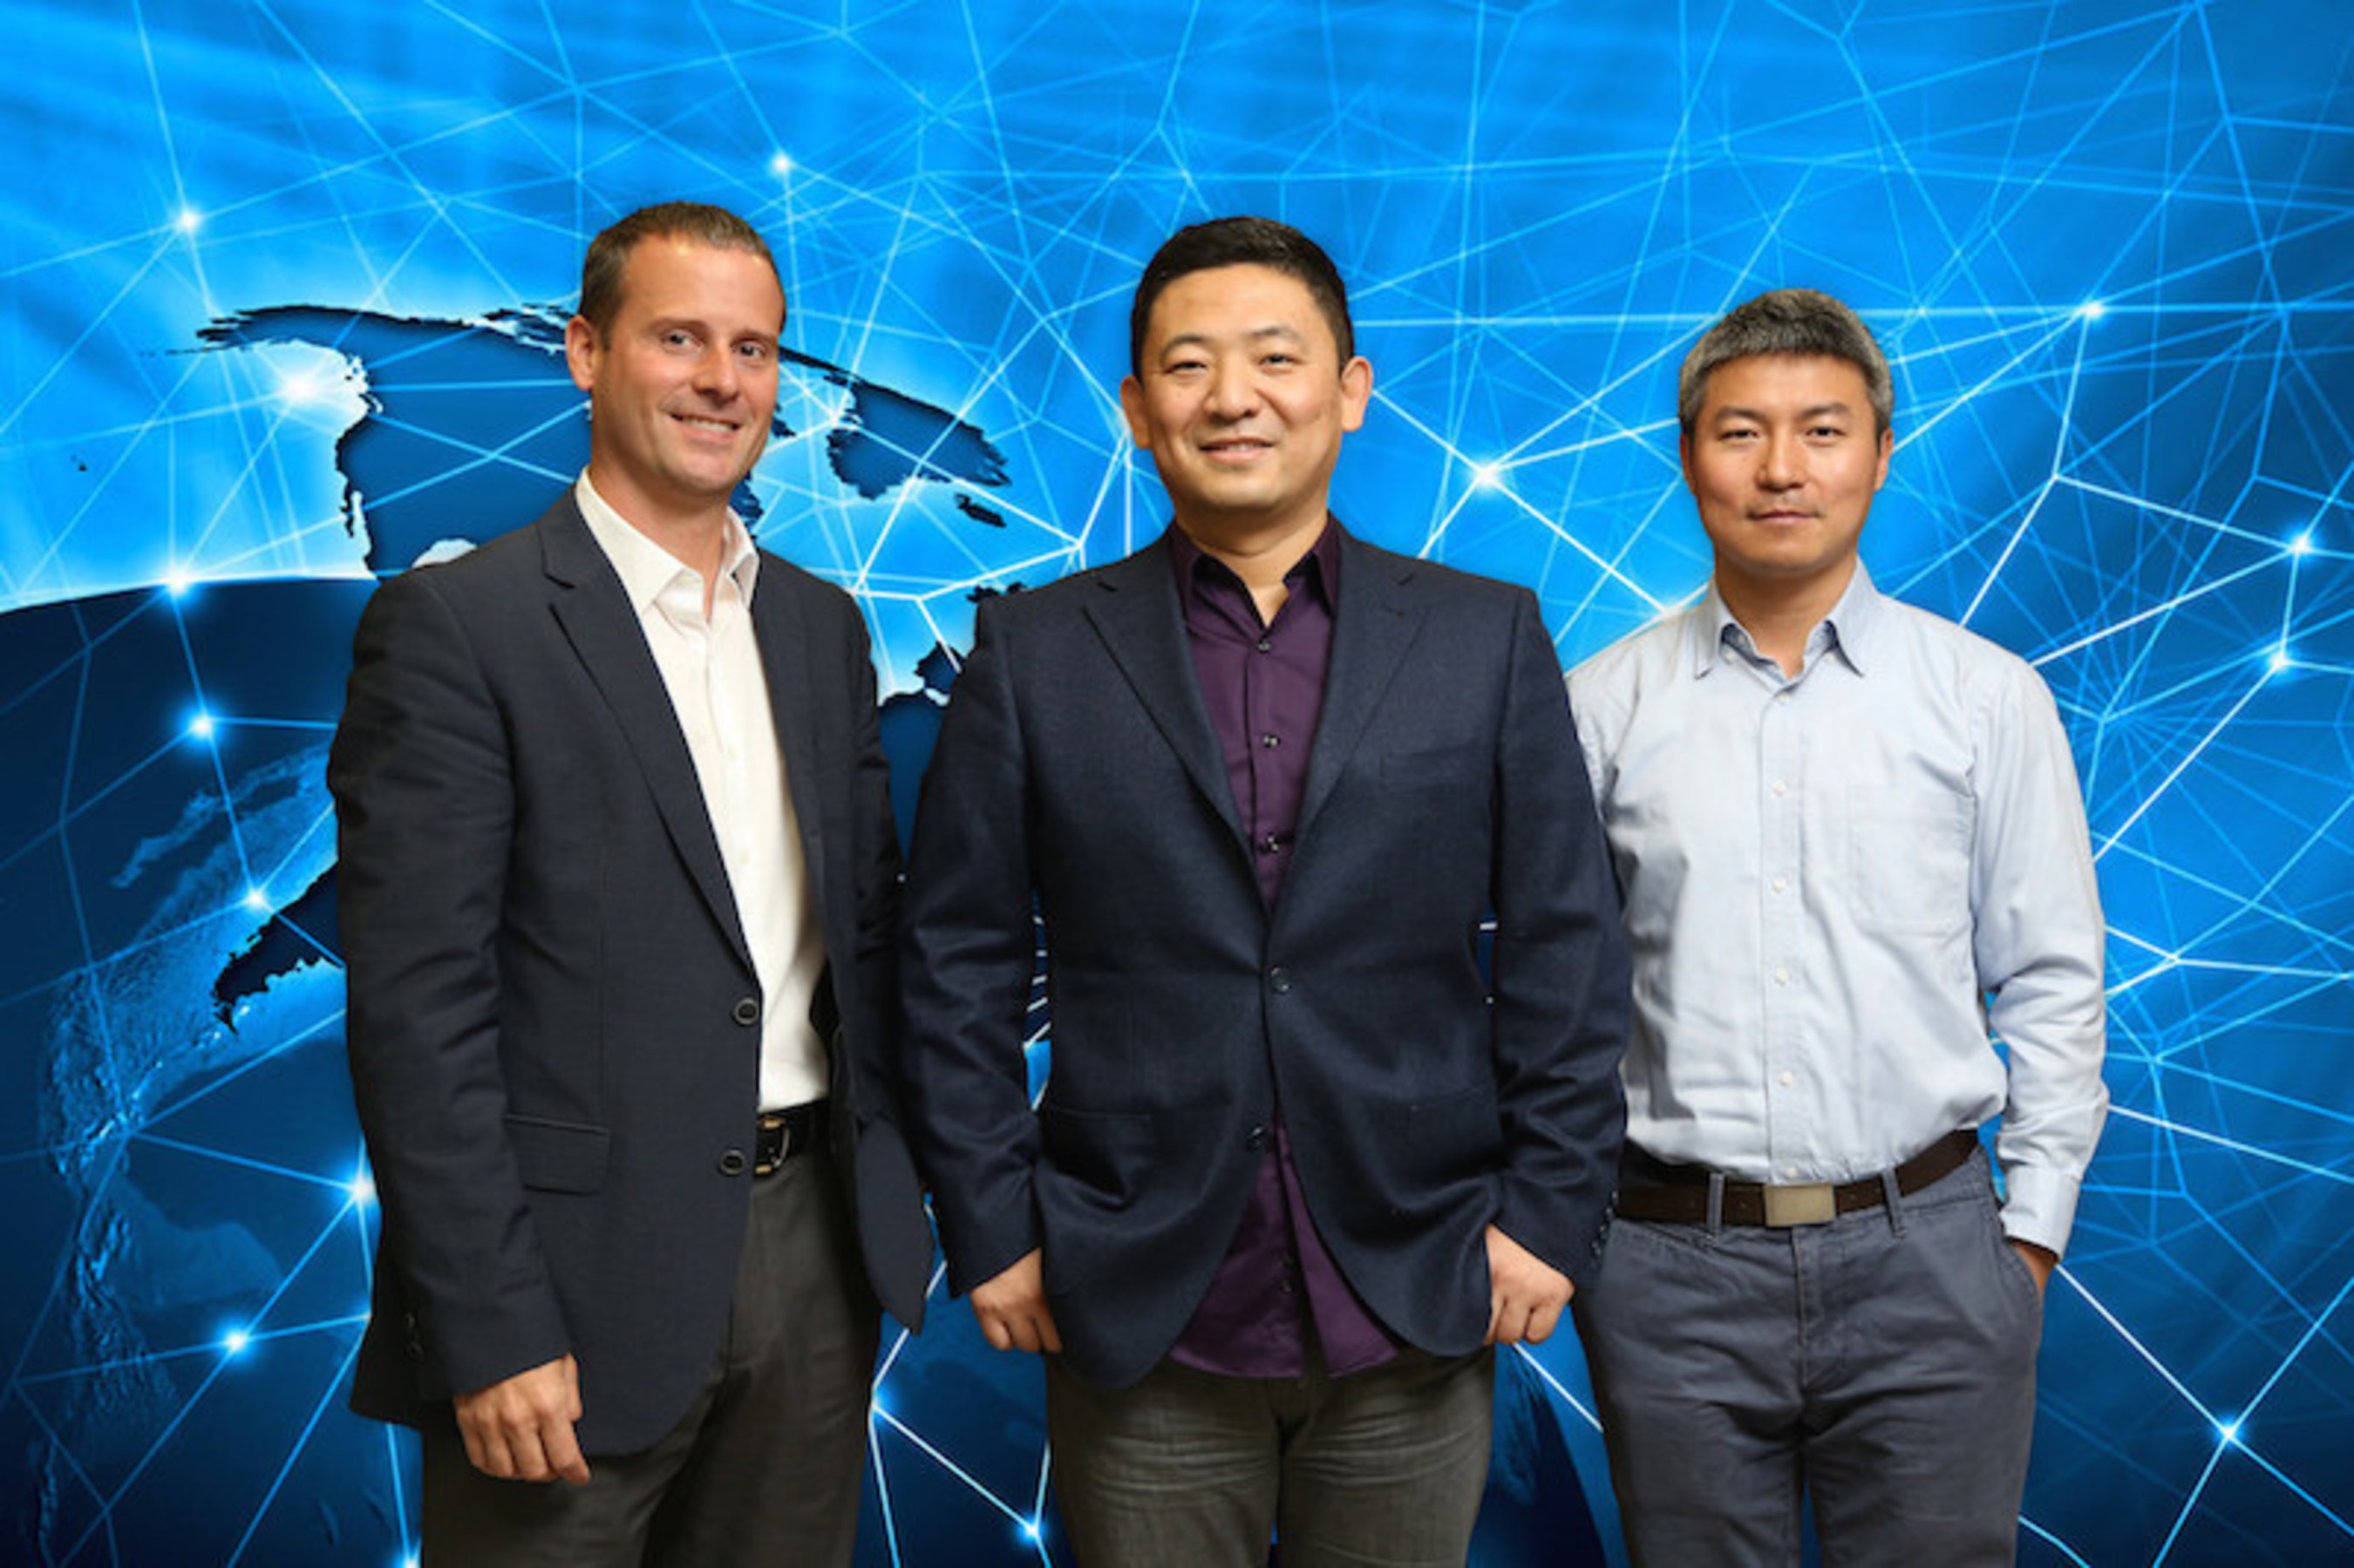 Intel’s General Manager of Consumption Sales Mr. Douglas Cougle, iQIYI’s Chief Technology Officer Mr. Xing Tang, and Director of Intel Labs China Mr. Gansha Wu